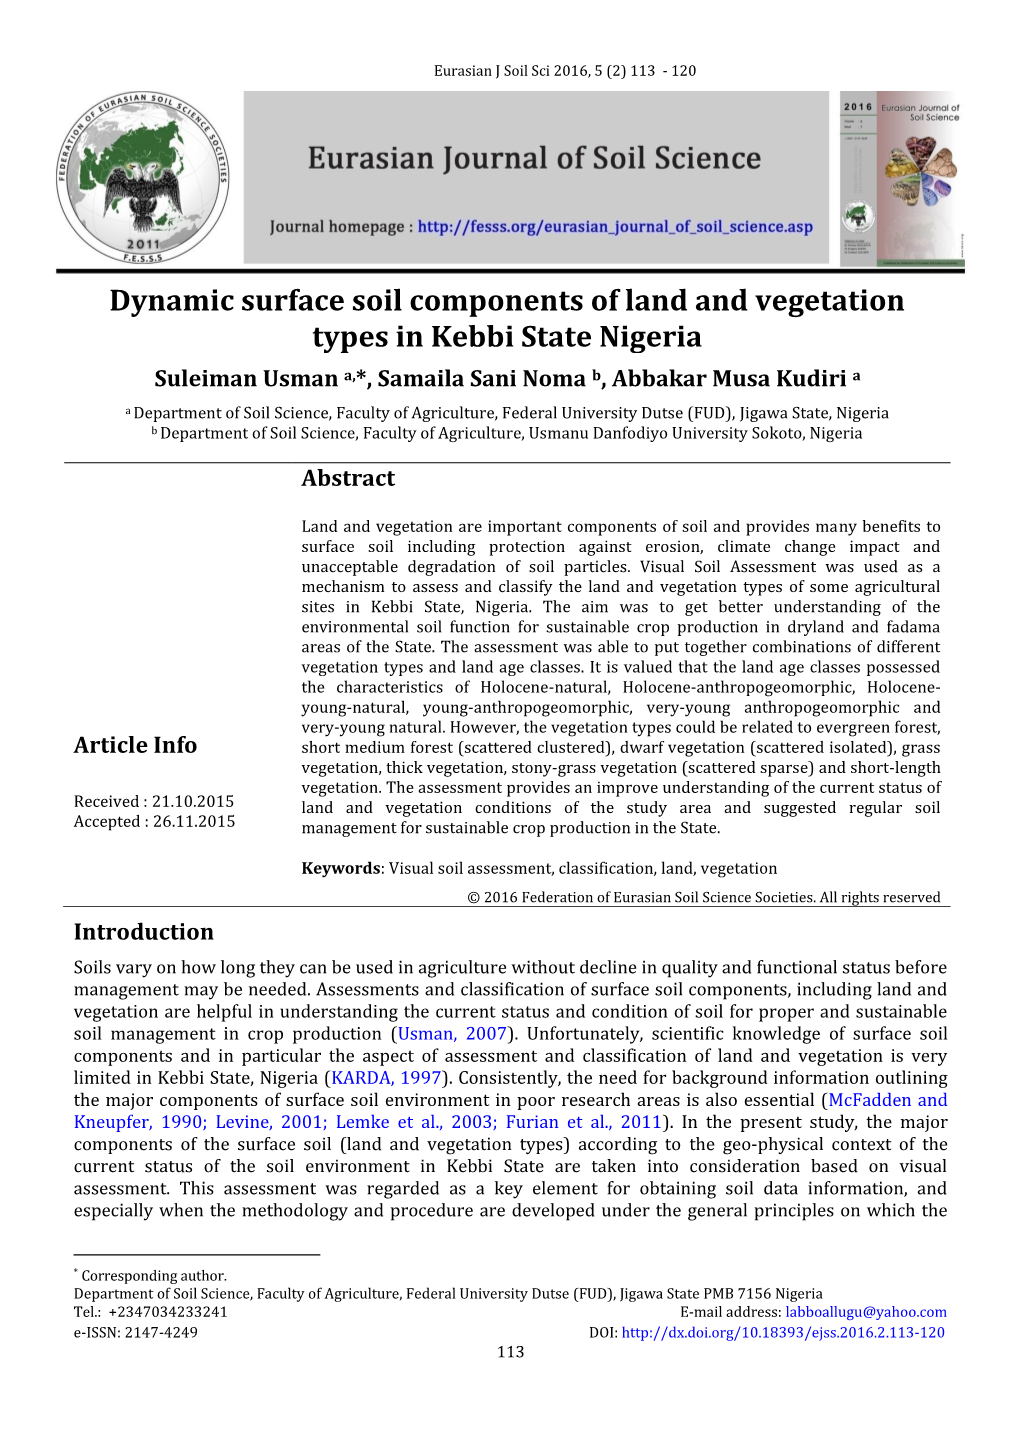 Dynamic Surface Soil Components of Land and Vegetation Types in Kebbi State Nigeria